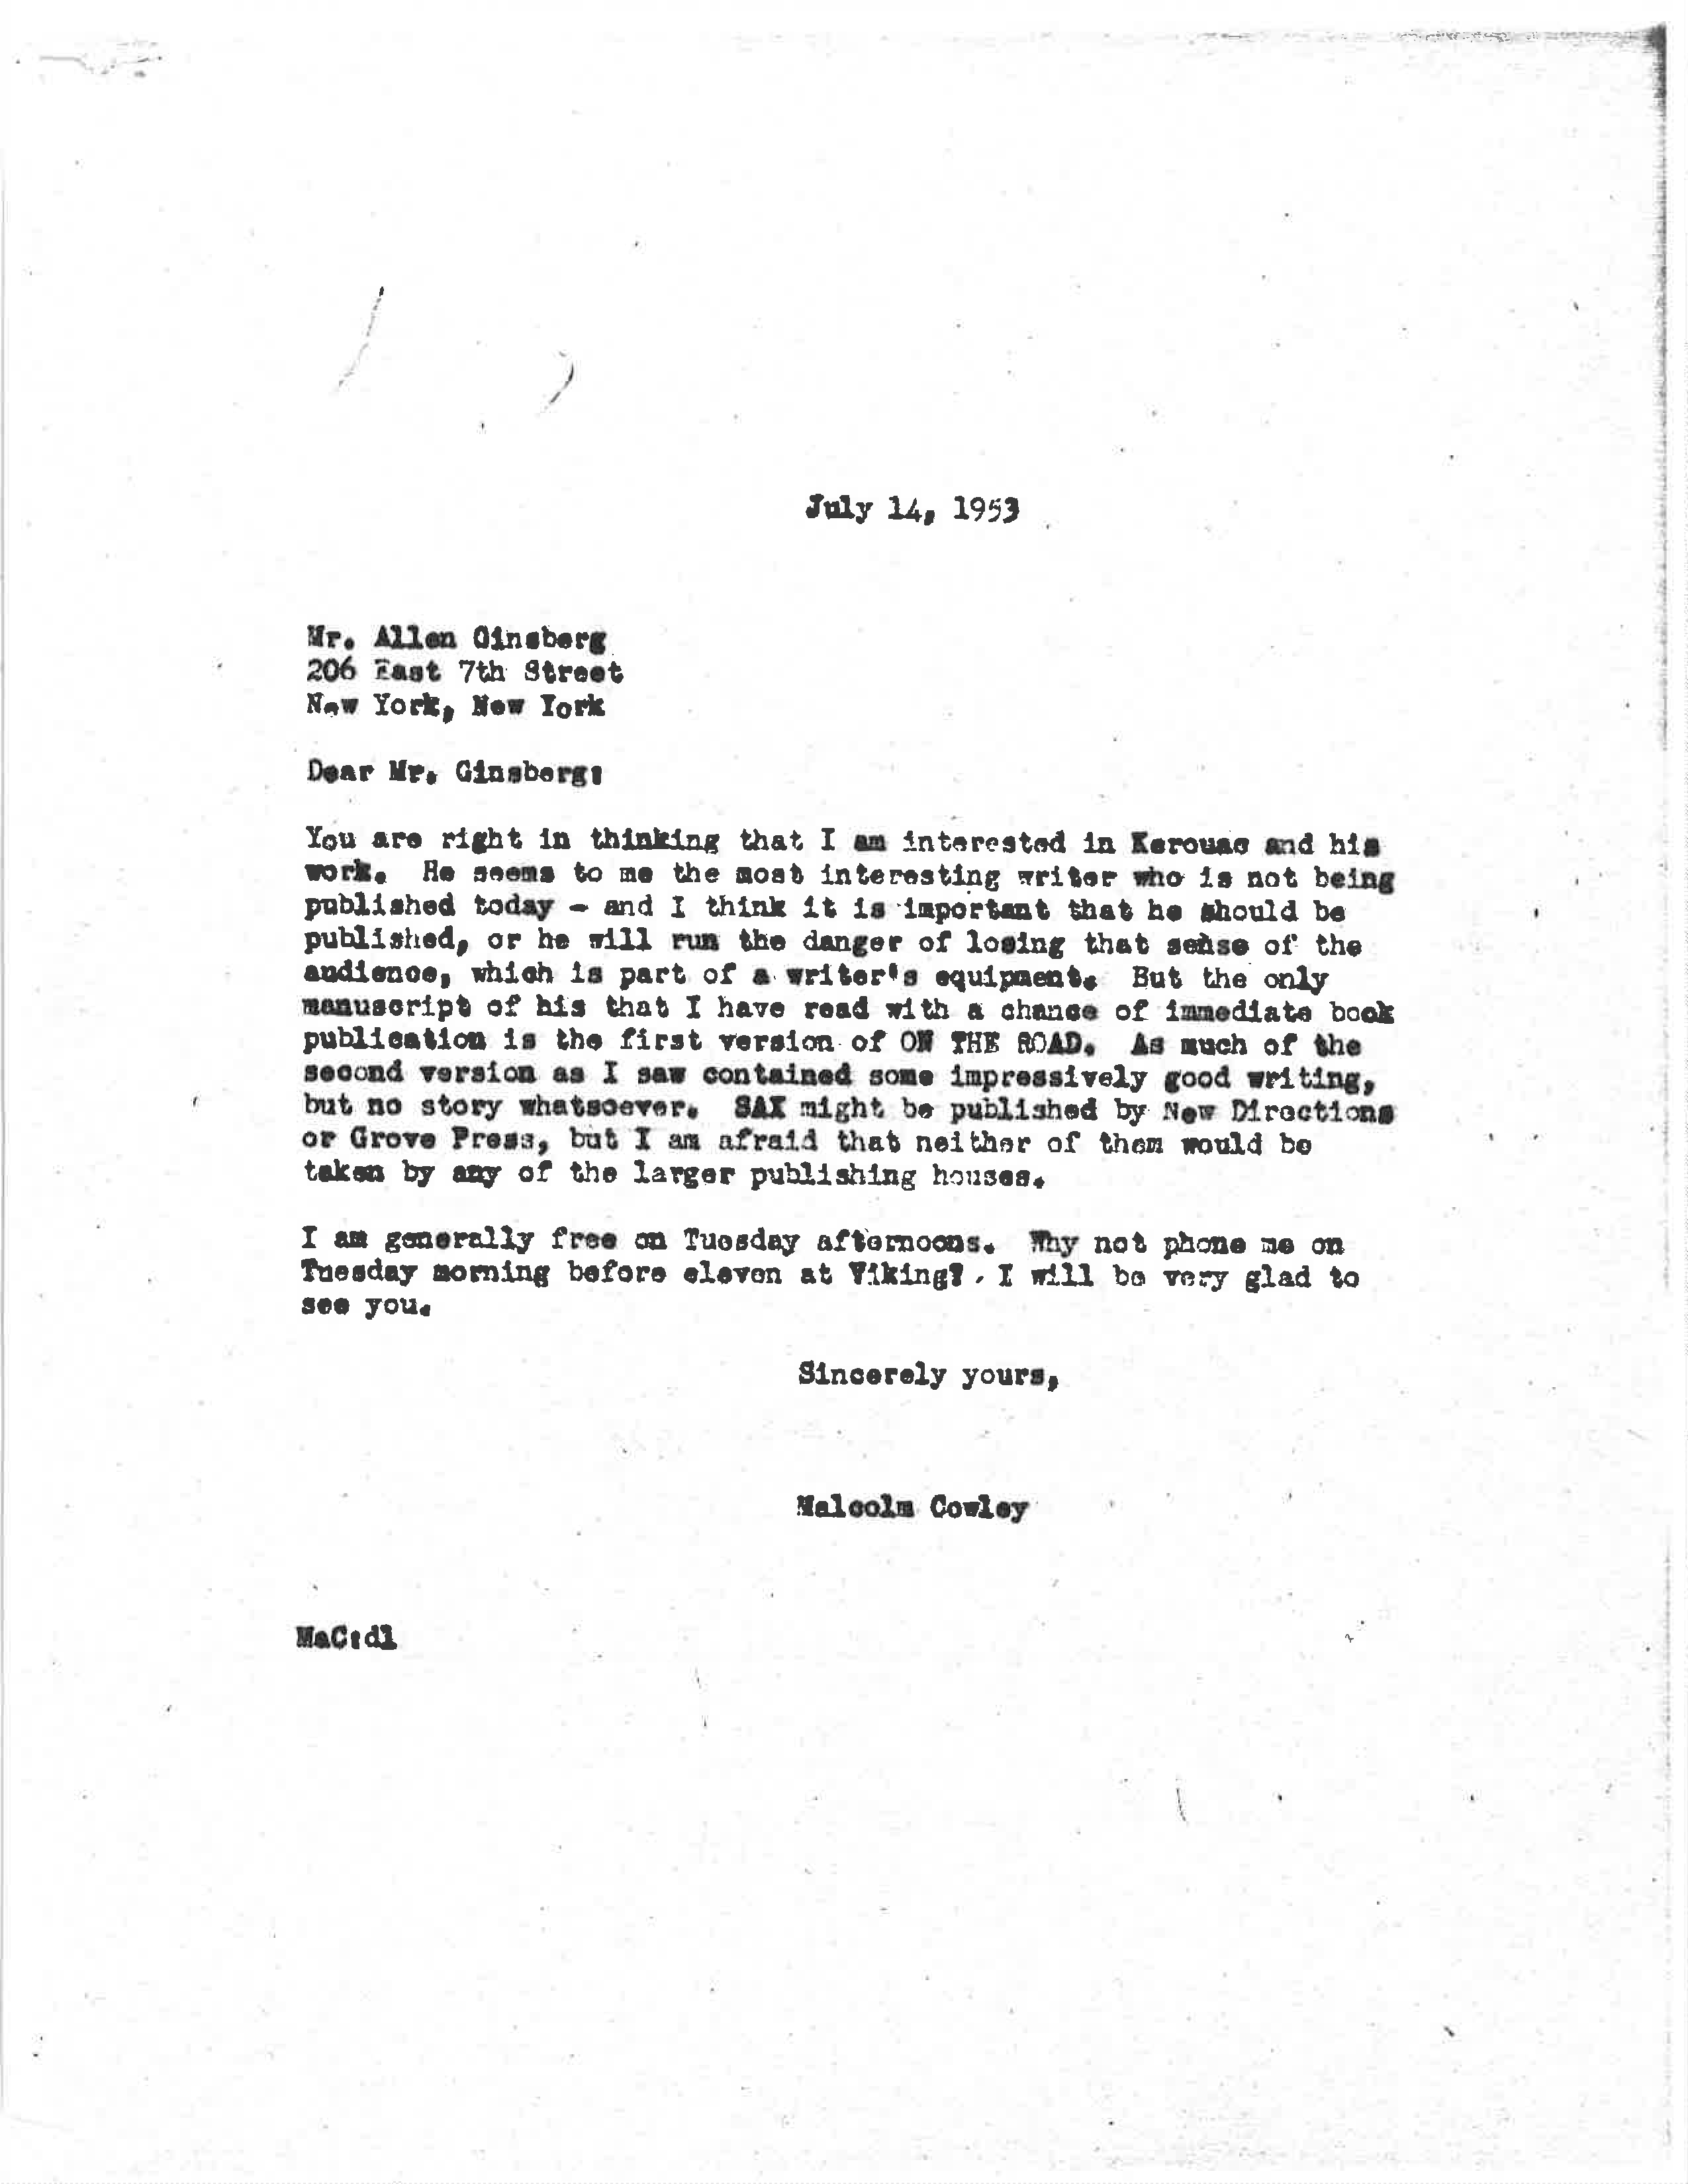 1953 letter from longtime Viking editorial advisor Malcolm Cowley to Allen Ginsberg indicating Viking’s interest in Kerouac